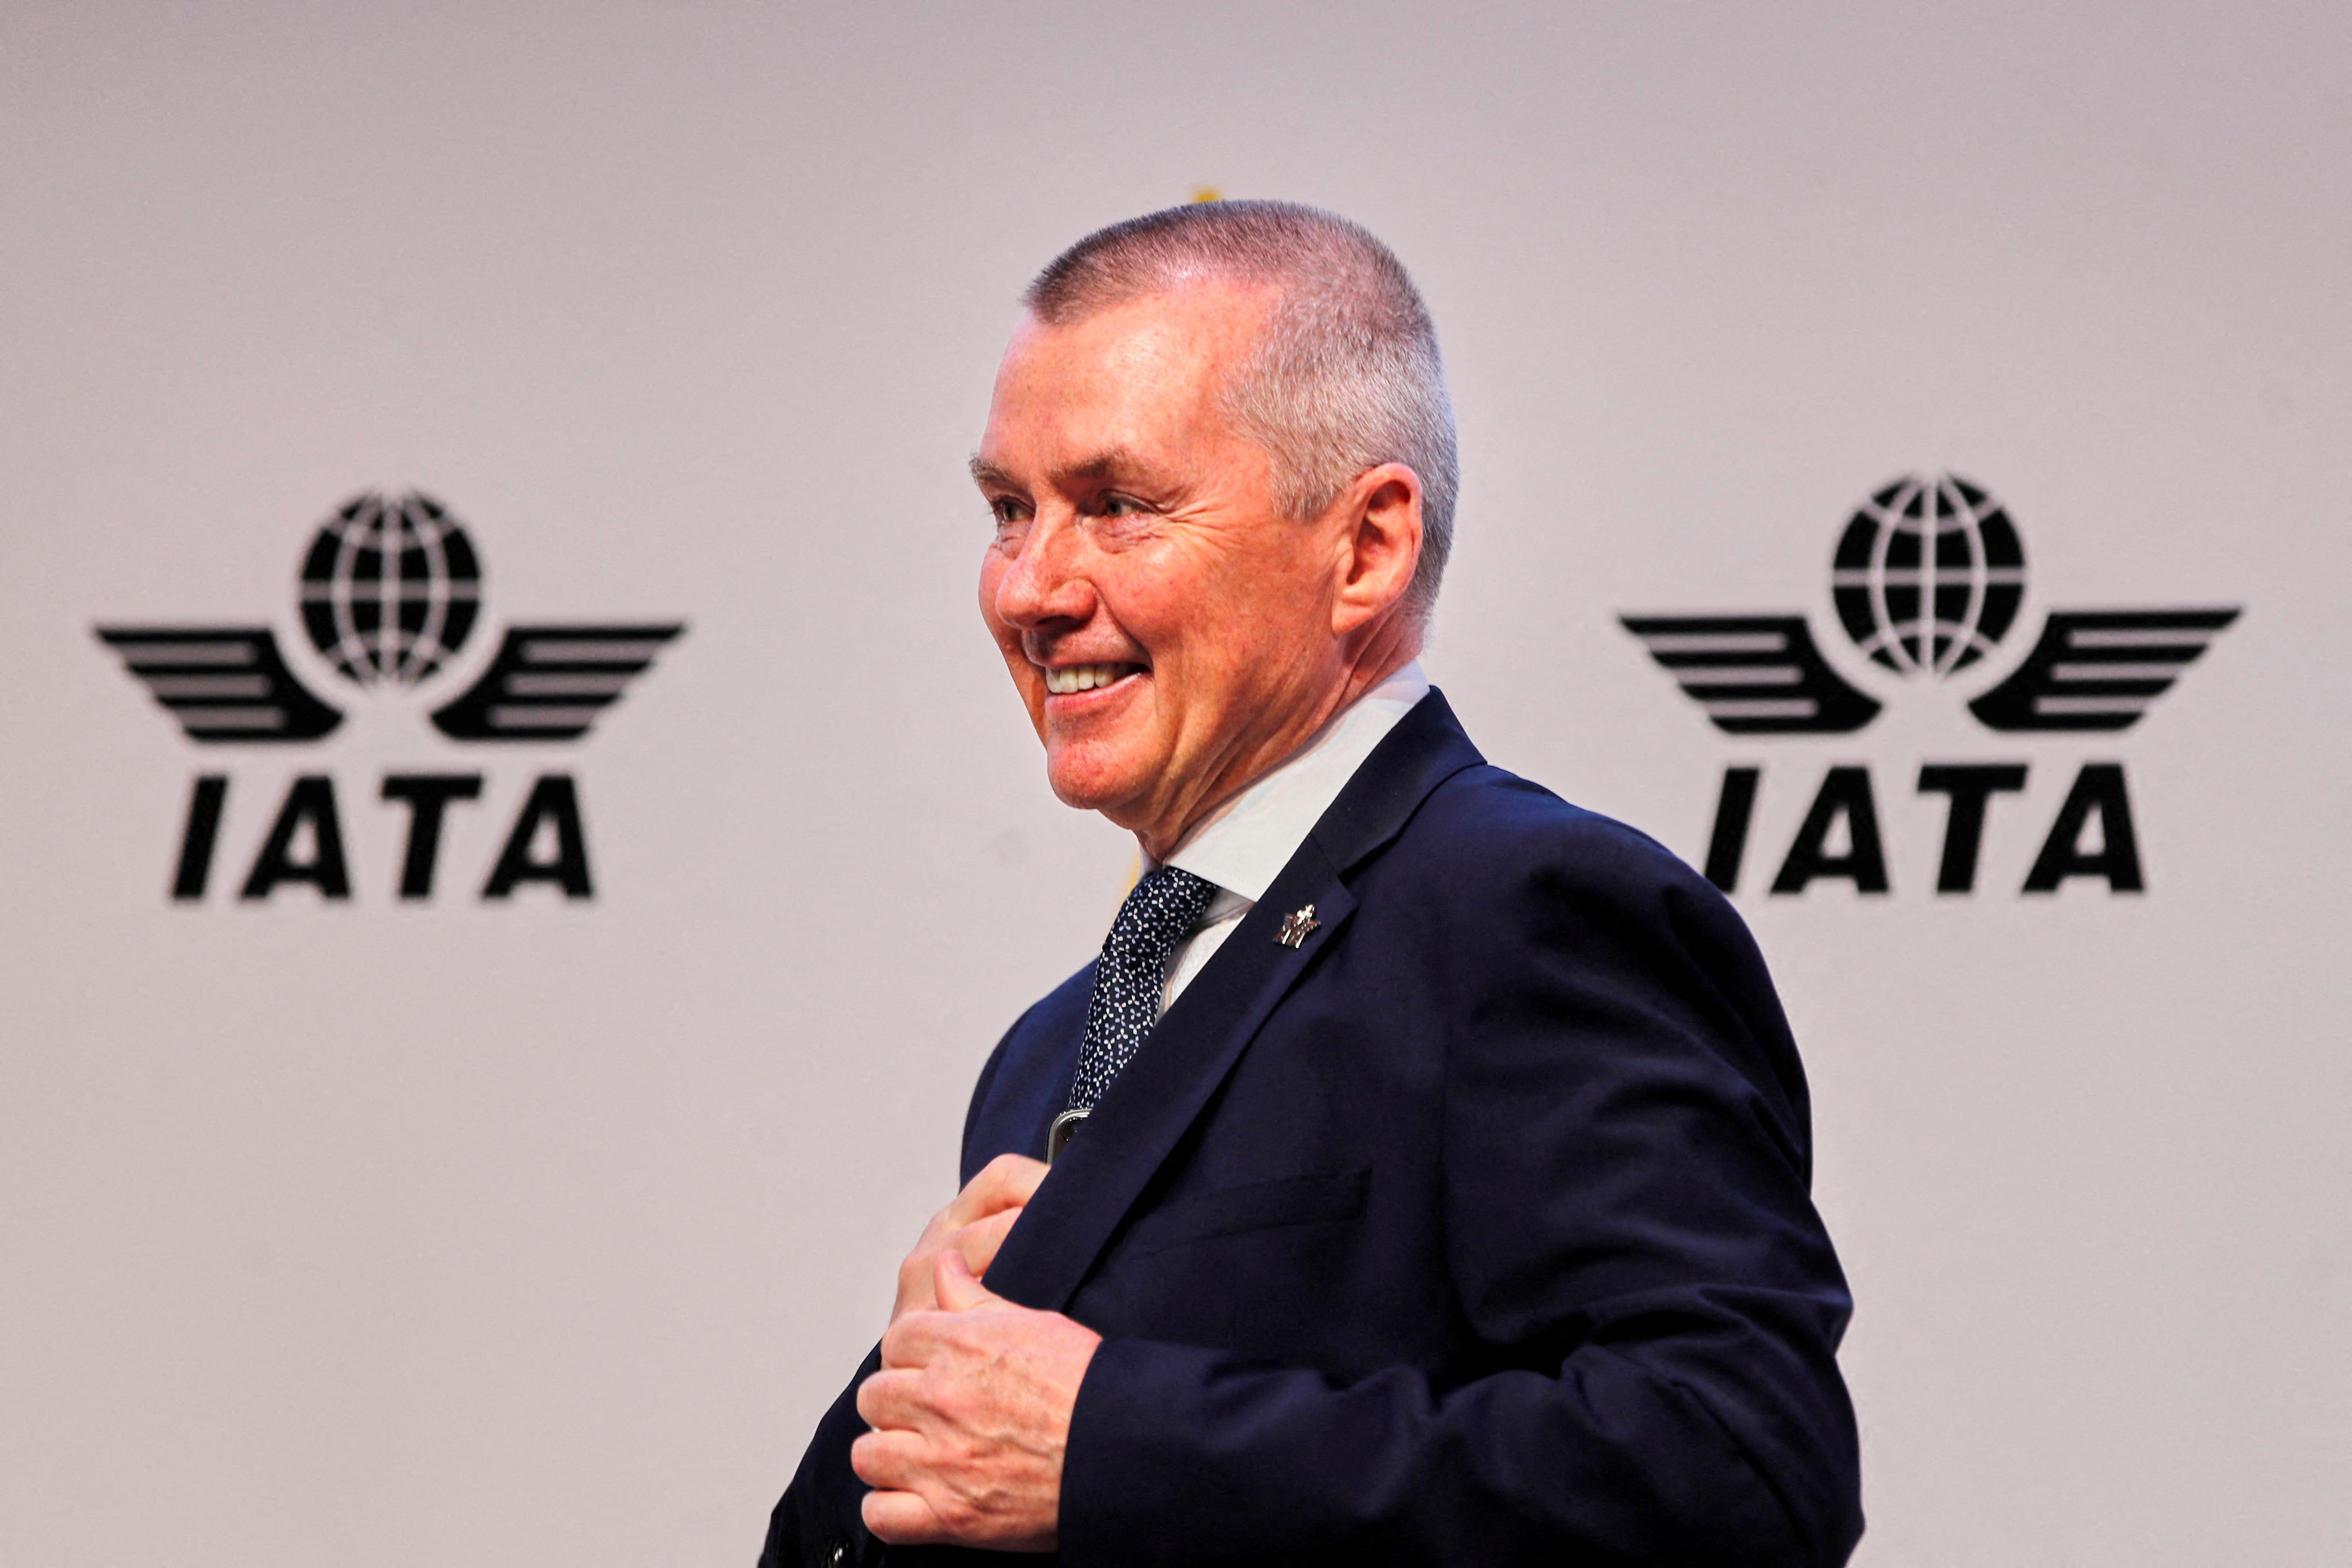 Director General Walsh attends IATA annual meeting in Istanbul